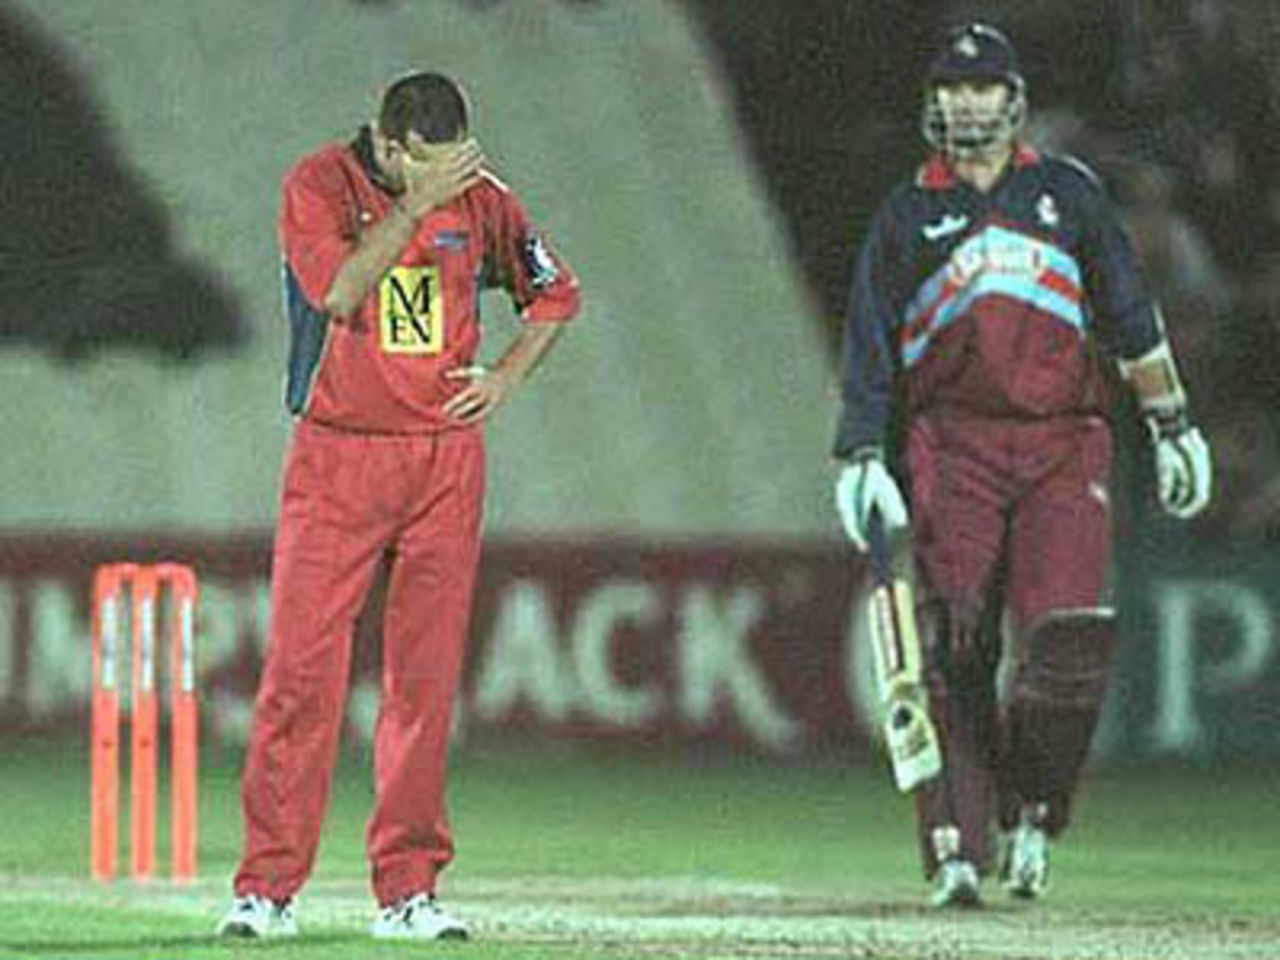 Scuderi is distraught as Martin McCague smashes him for 4, National League Division One, 2000, Lancashire v Kent, Old Trafford, Manchester, 15 August 2000.